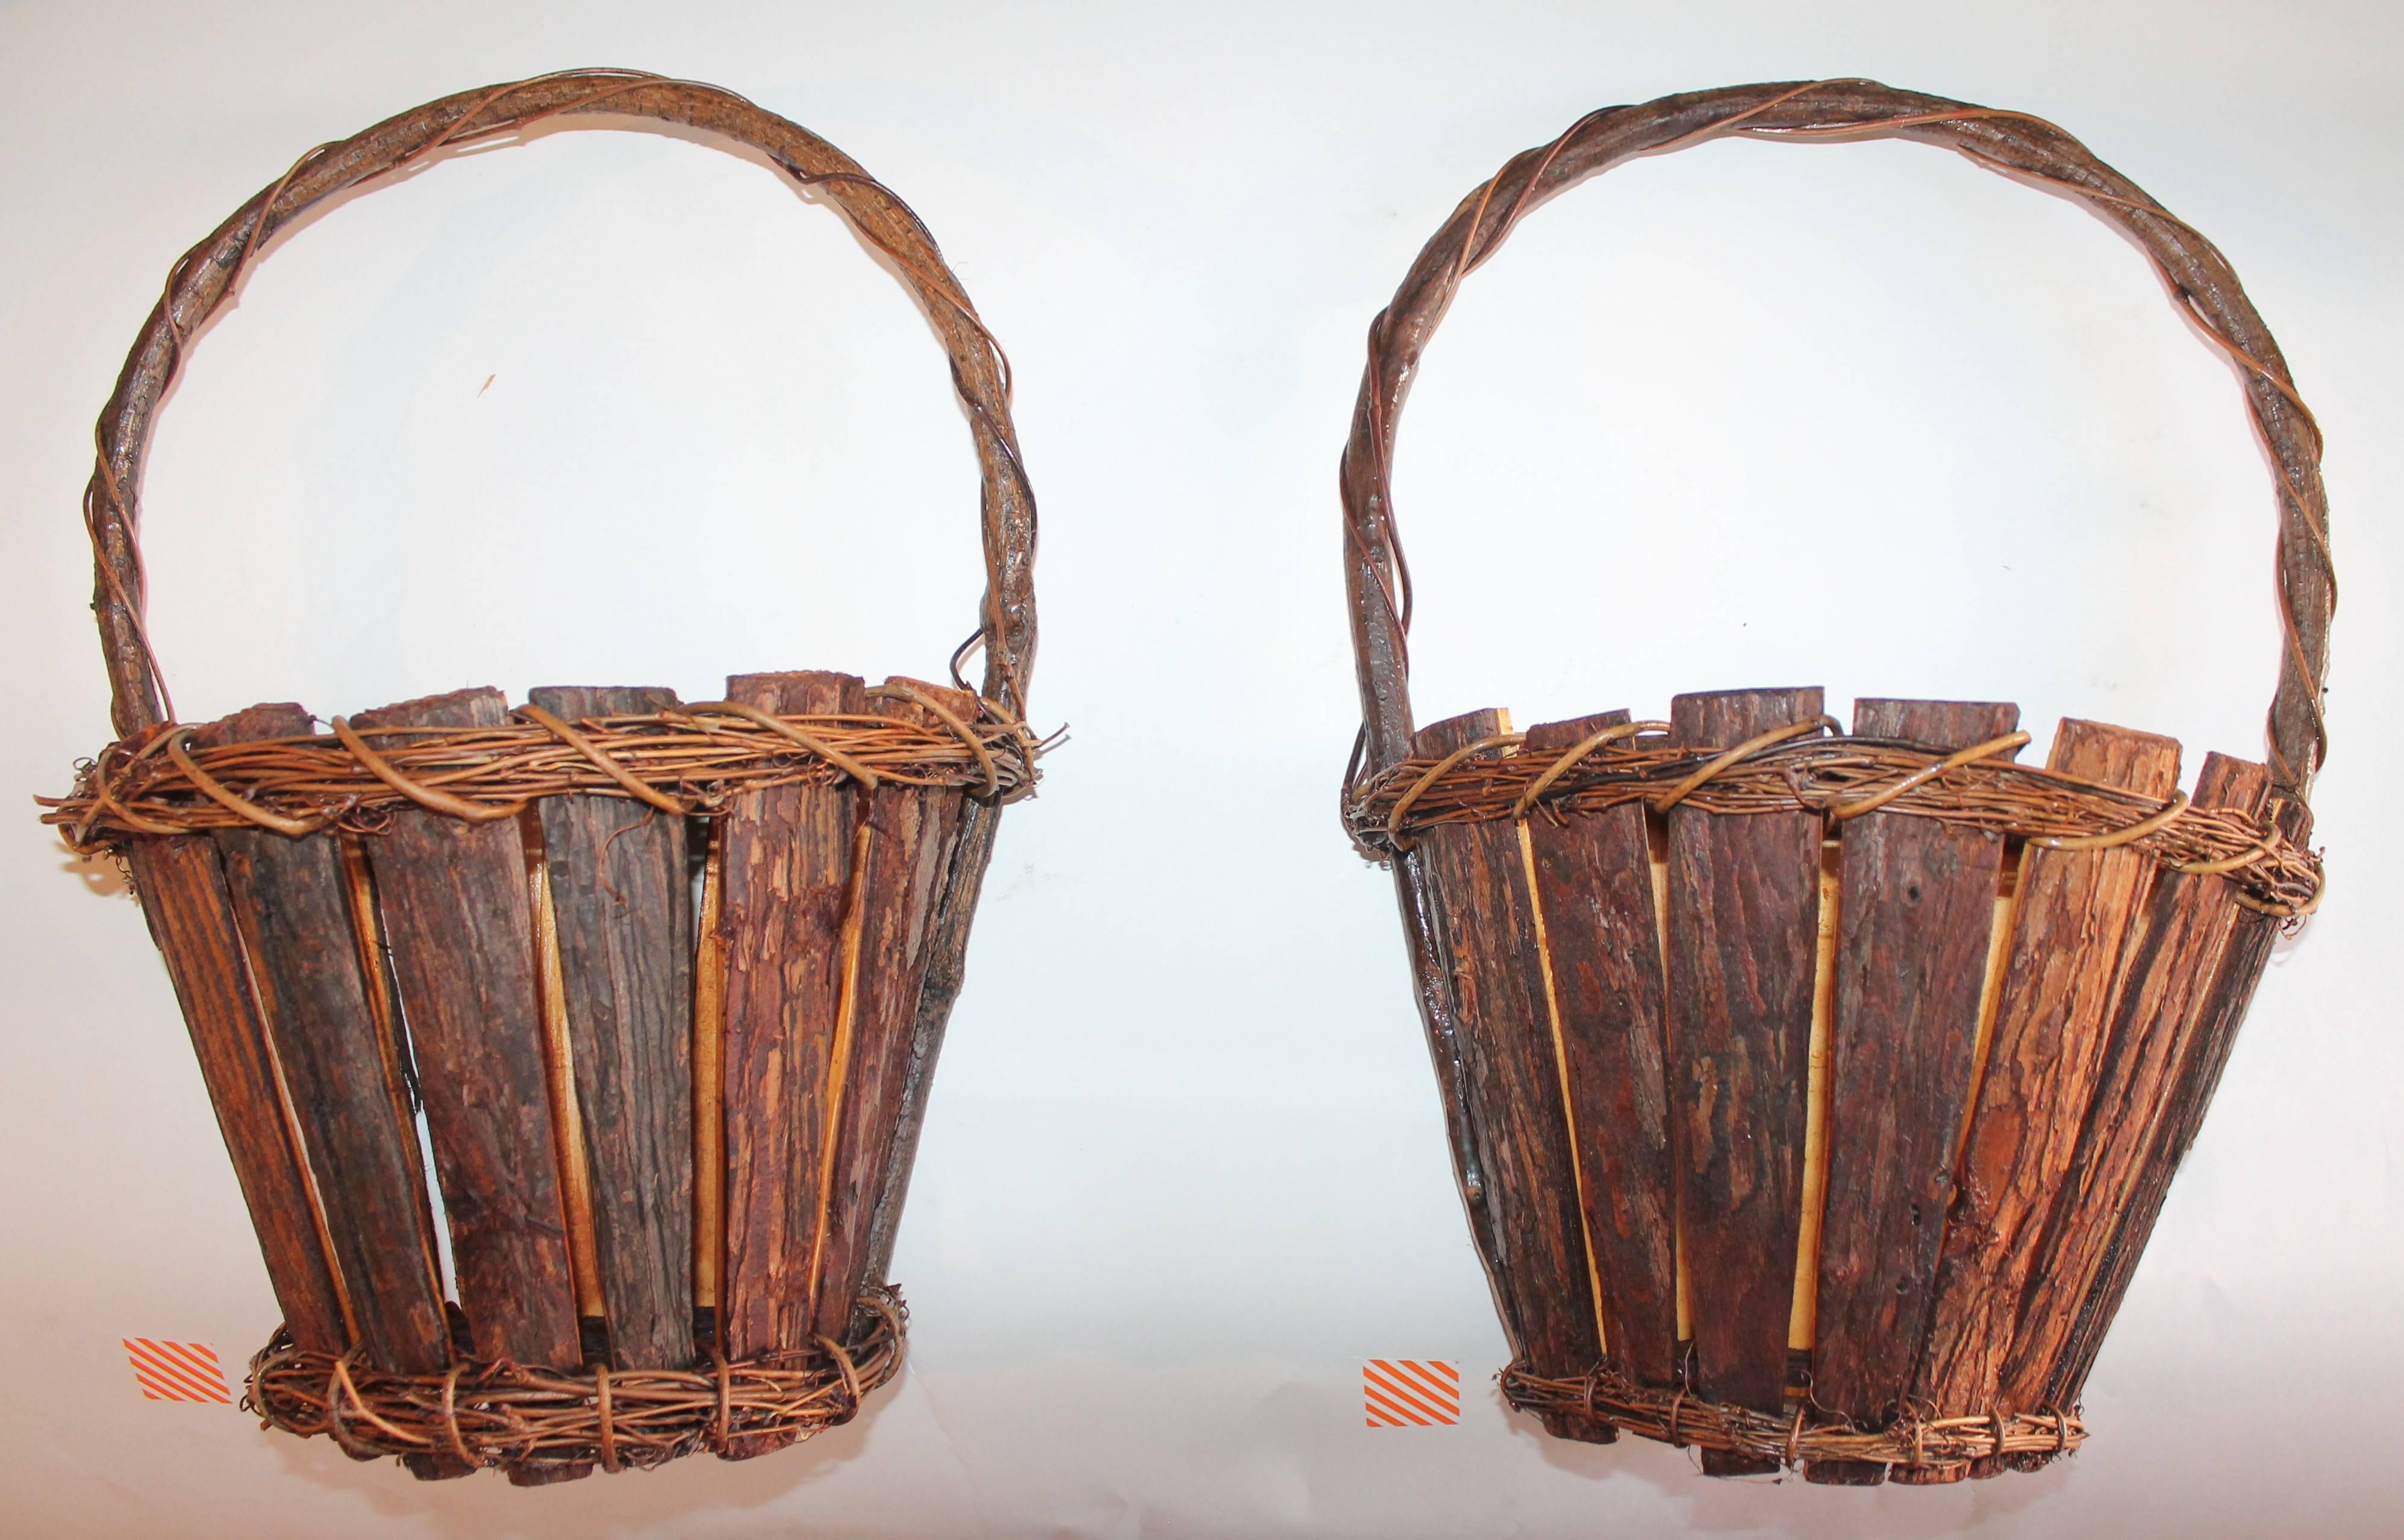 These cool half round wall baskets are in pristine condition and very sturdy.